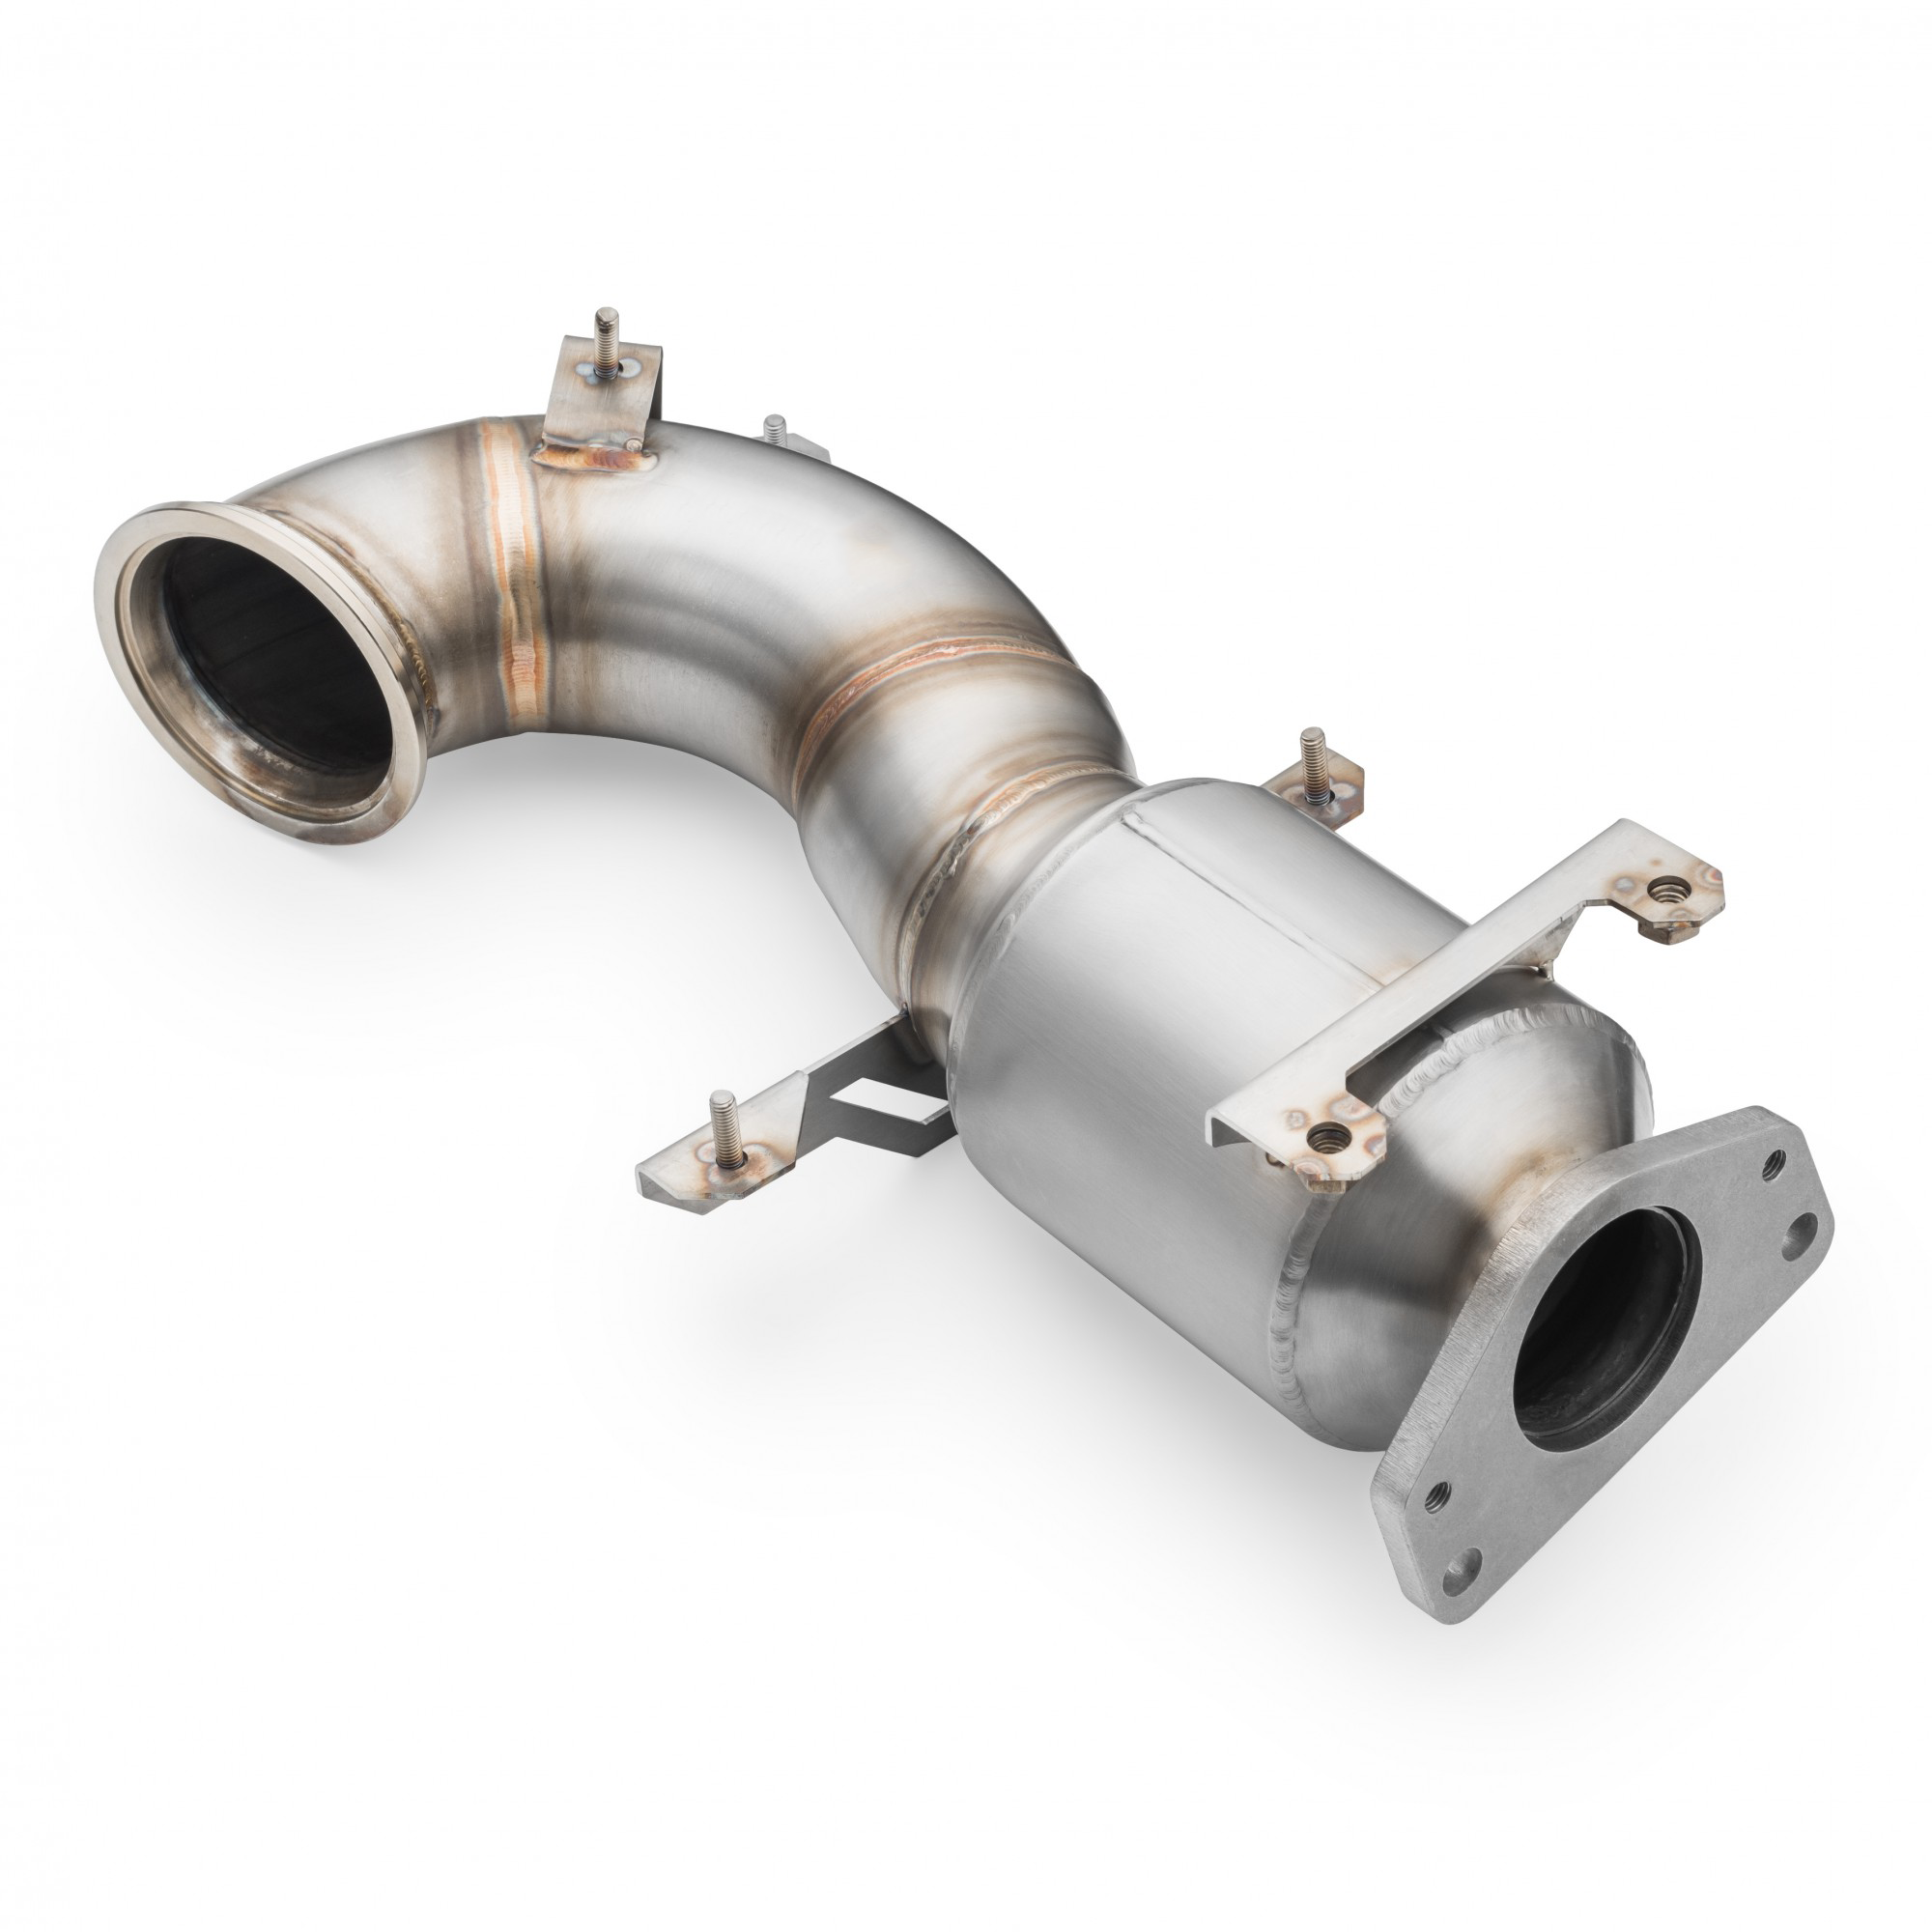 TurboLogic Downpipe Abarth 695 1.4T with EURO 4 catalyst 